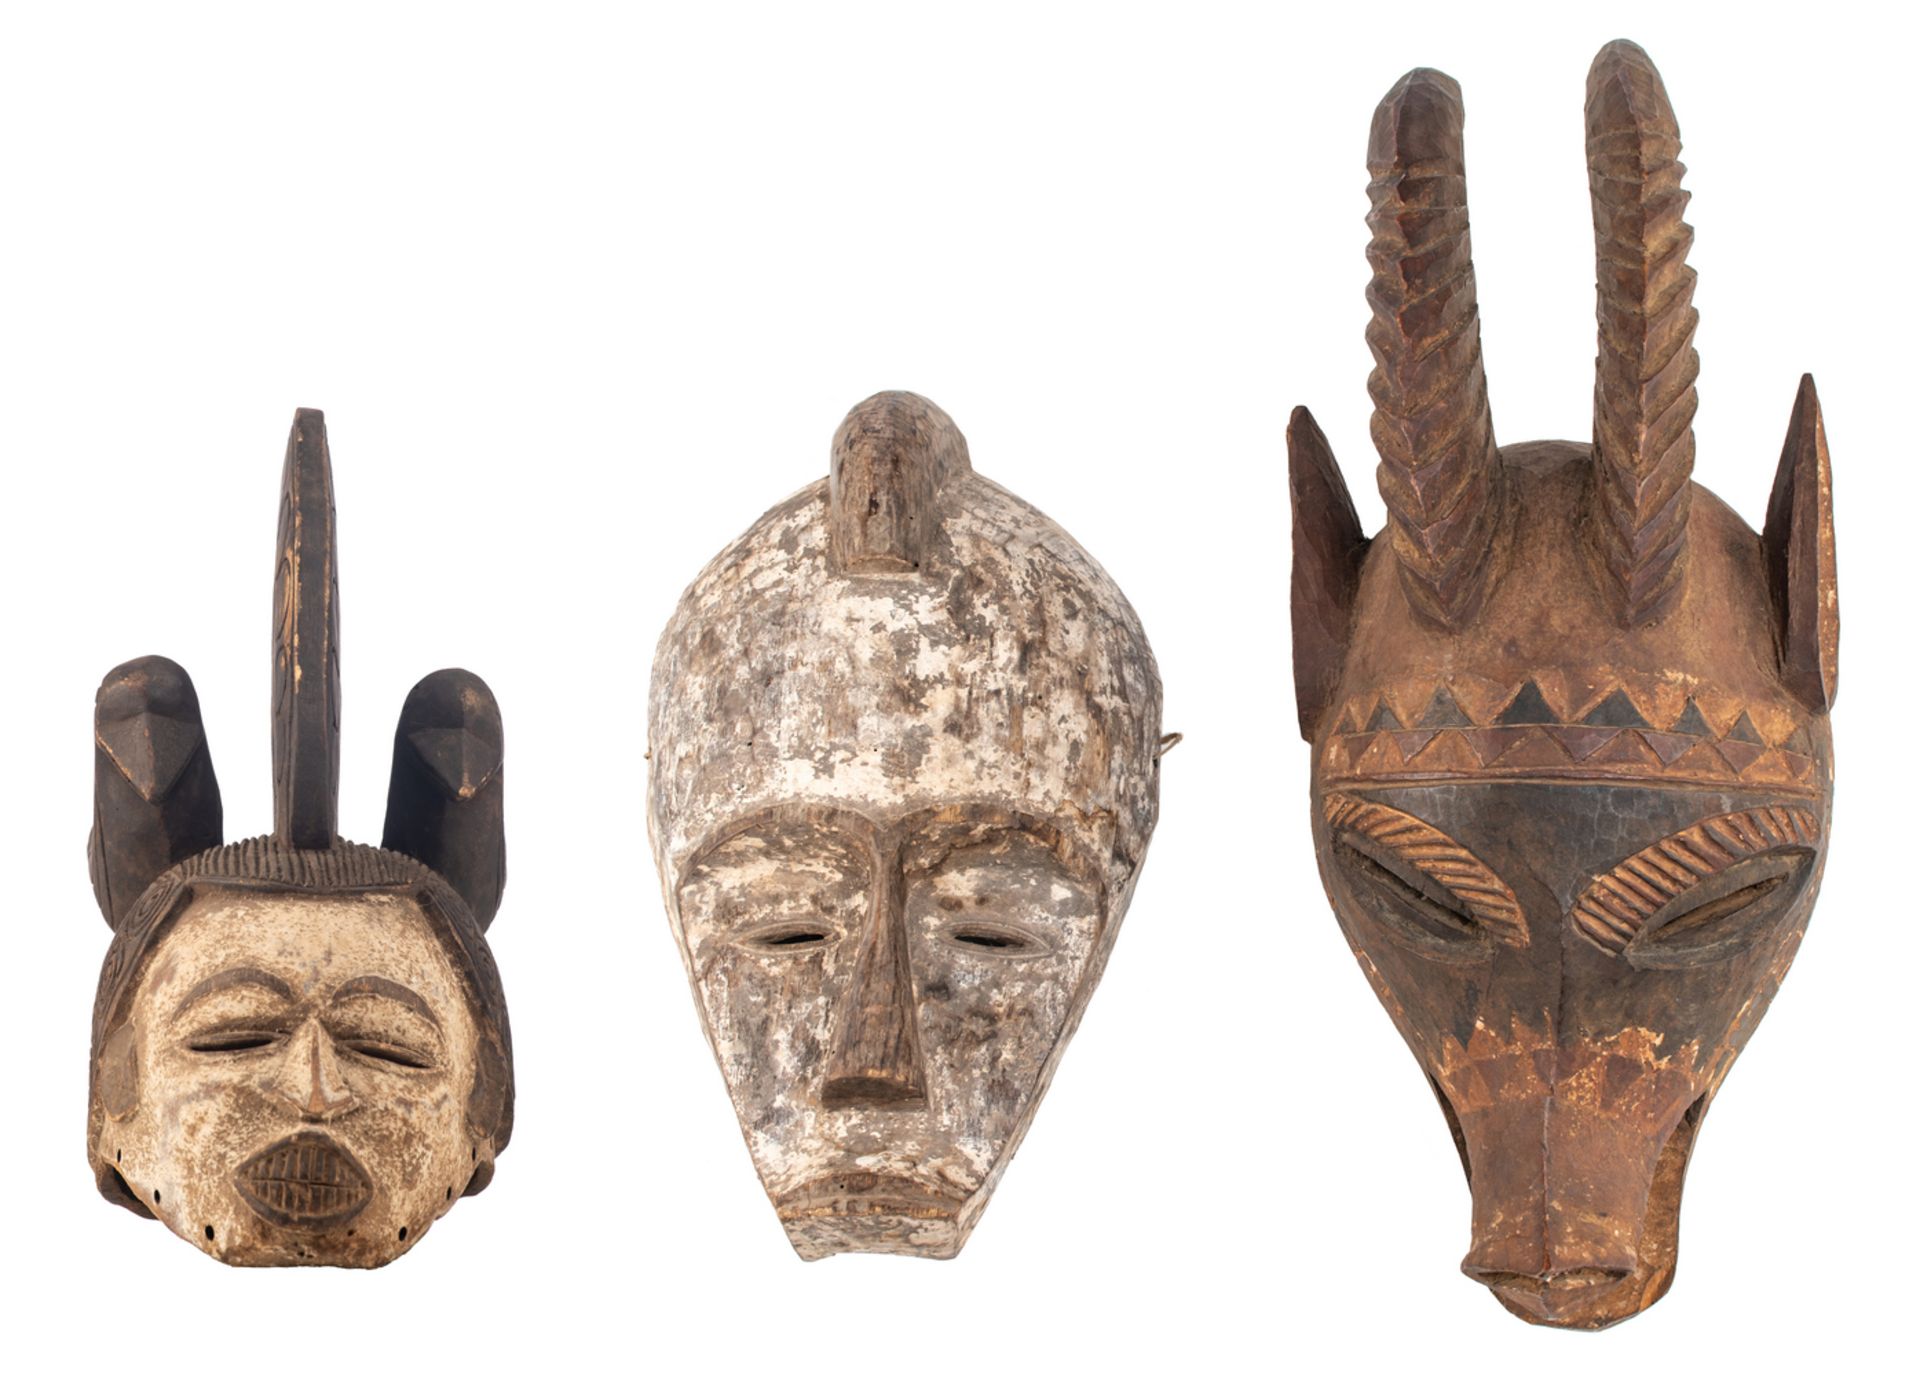 Three polychrome decorated African wooden masks, different regions and tribes (e.g. Fang - Gabon), H